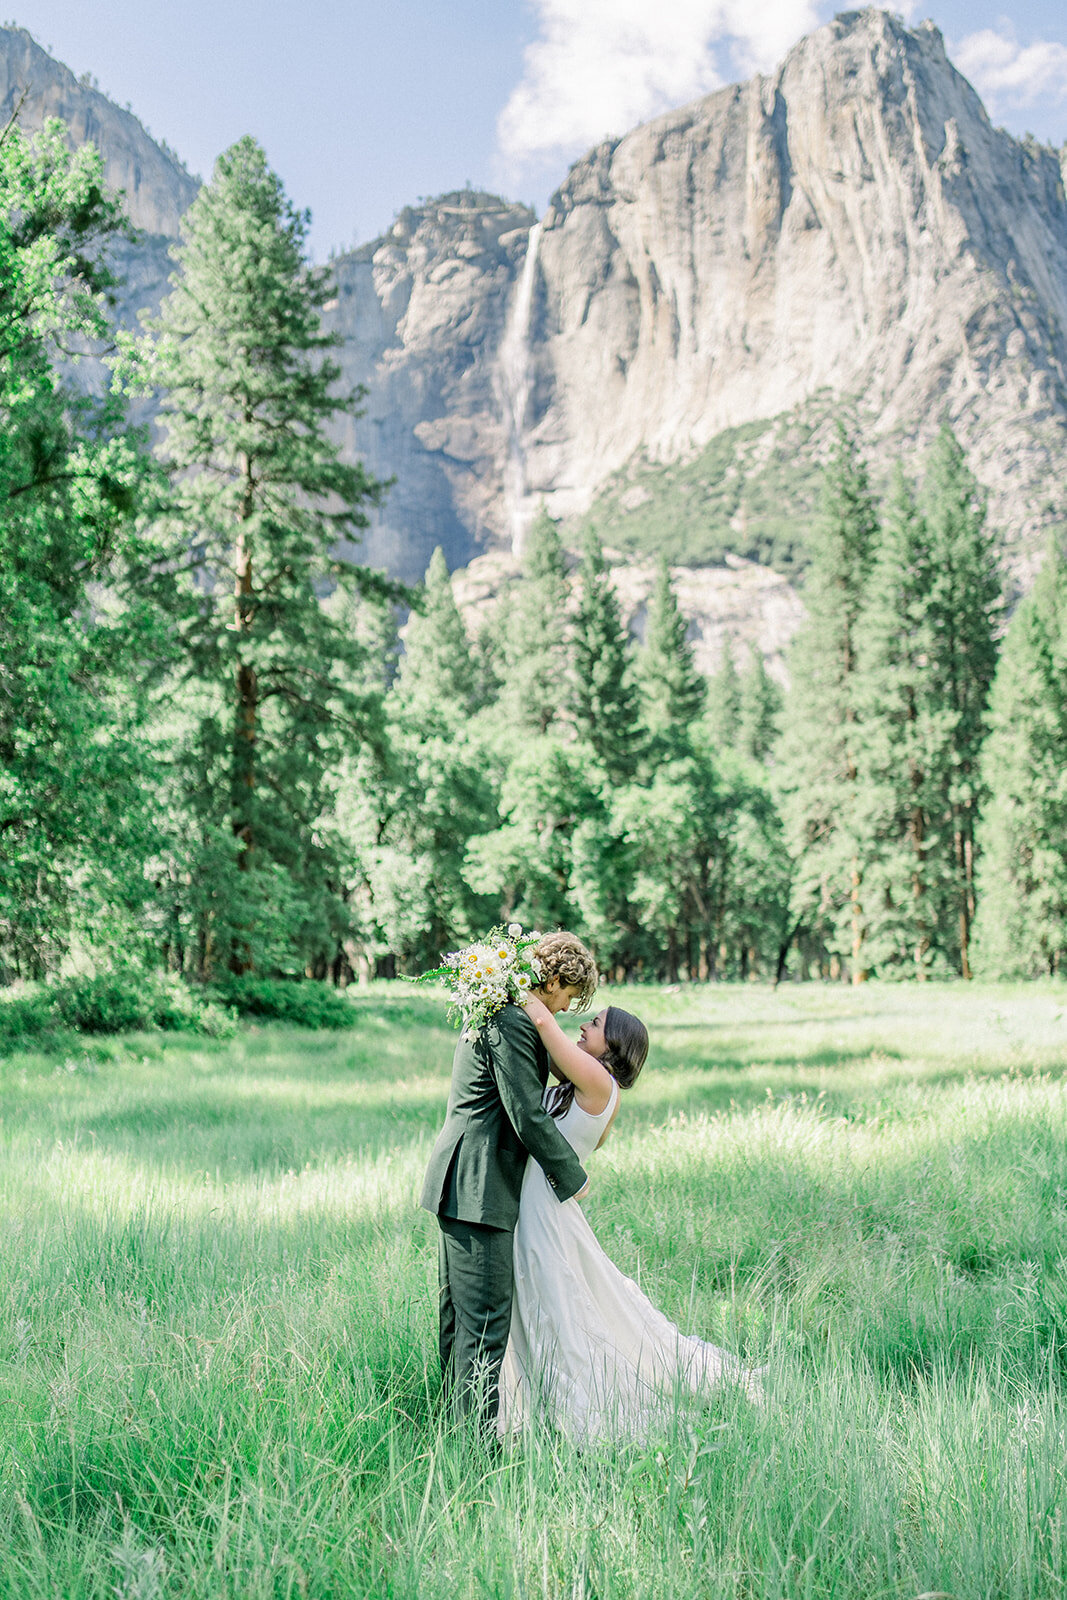 Bride and groom in from of El Capitan at their Yosemite National Park wedding